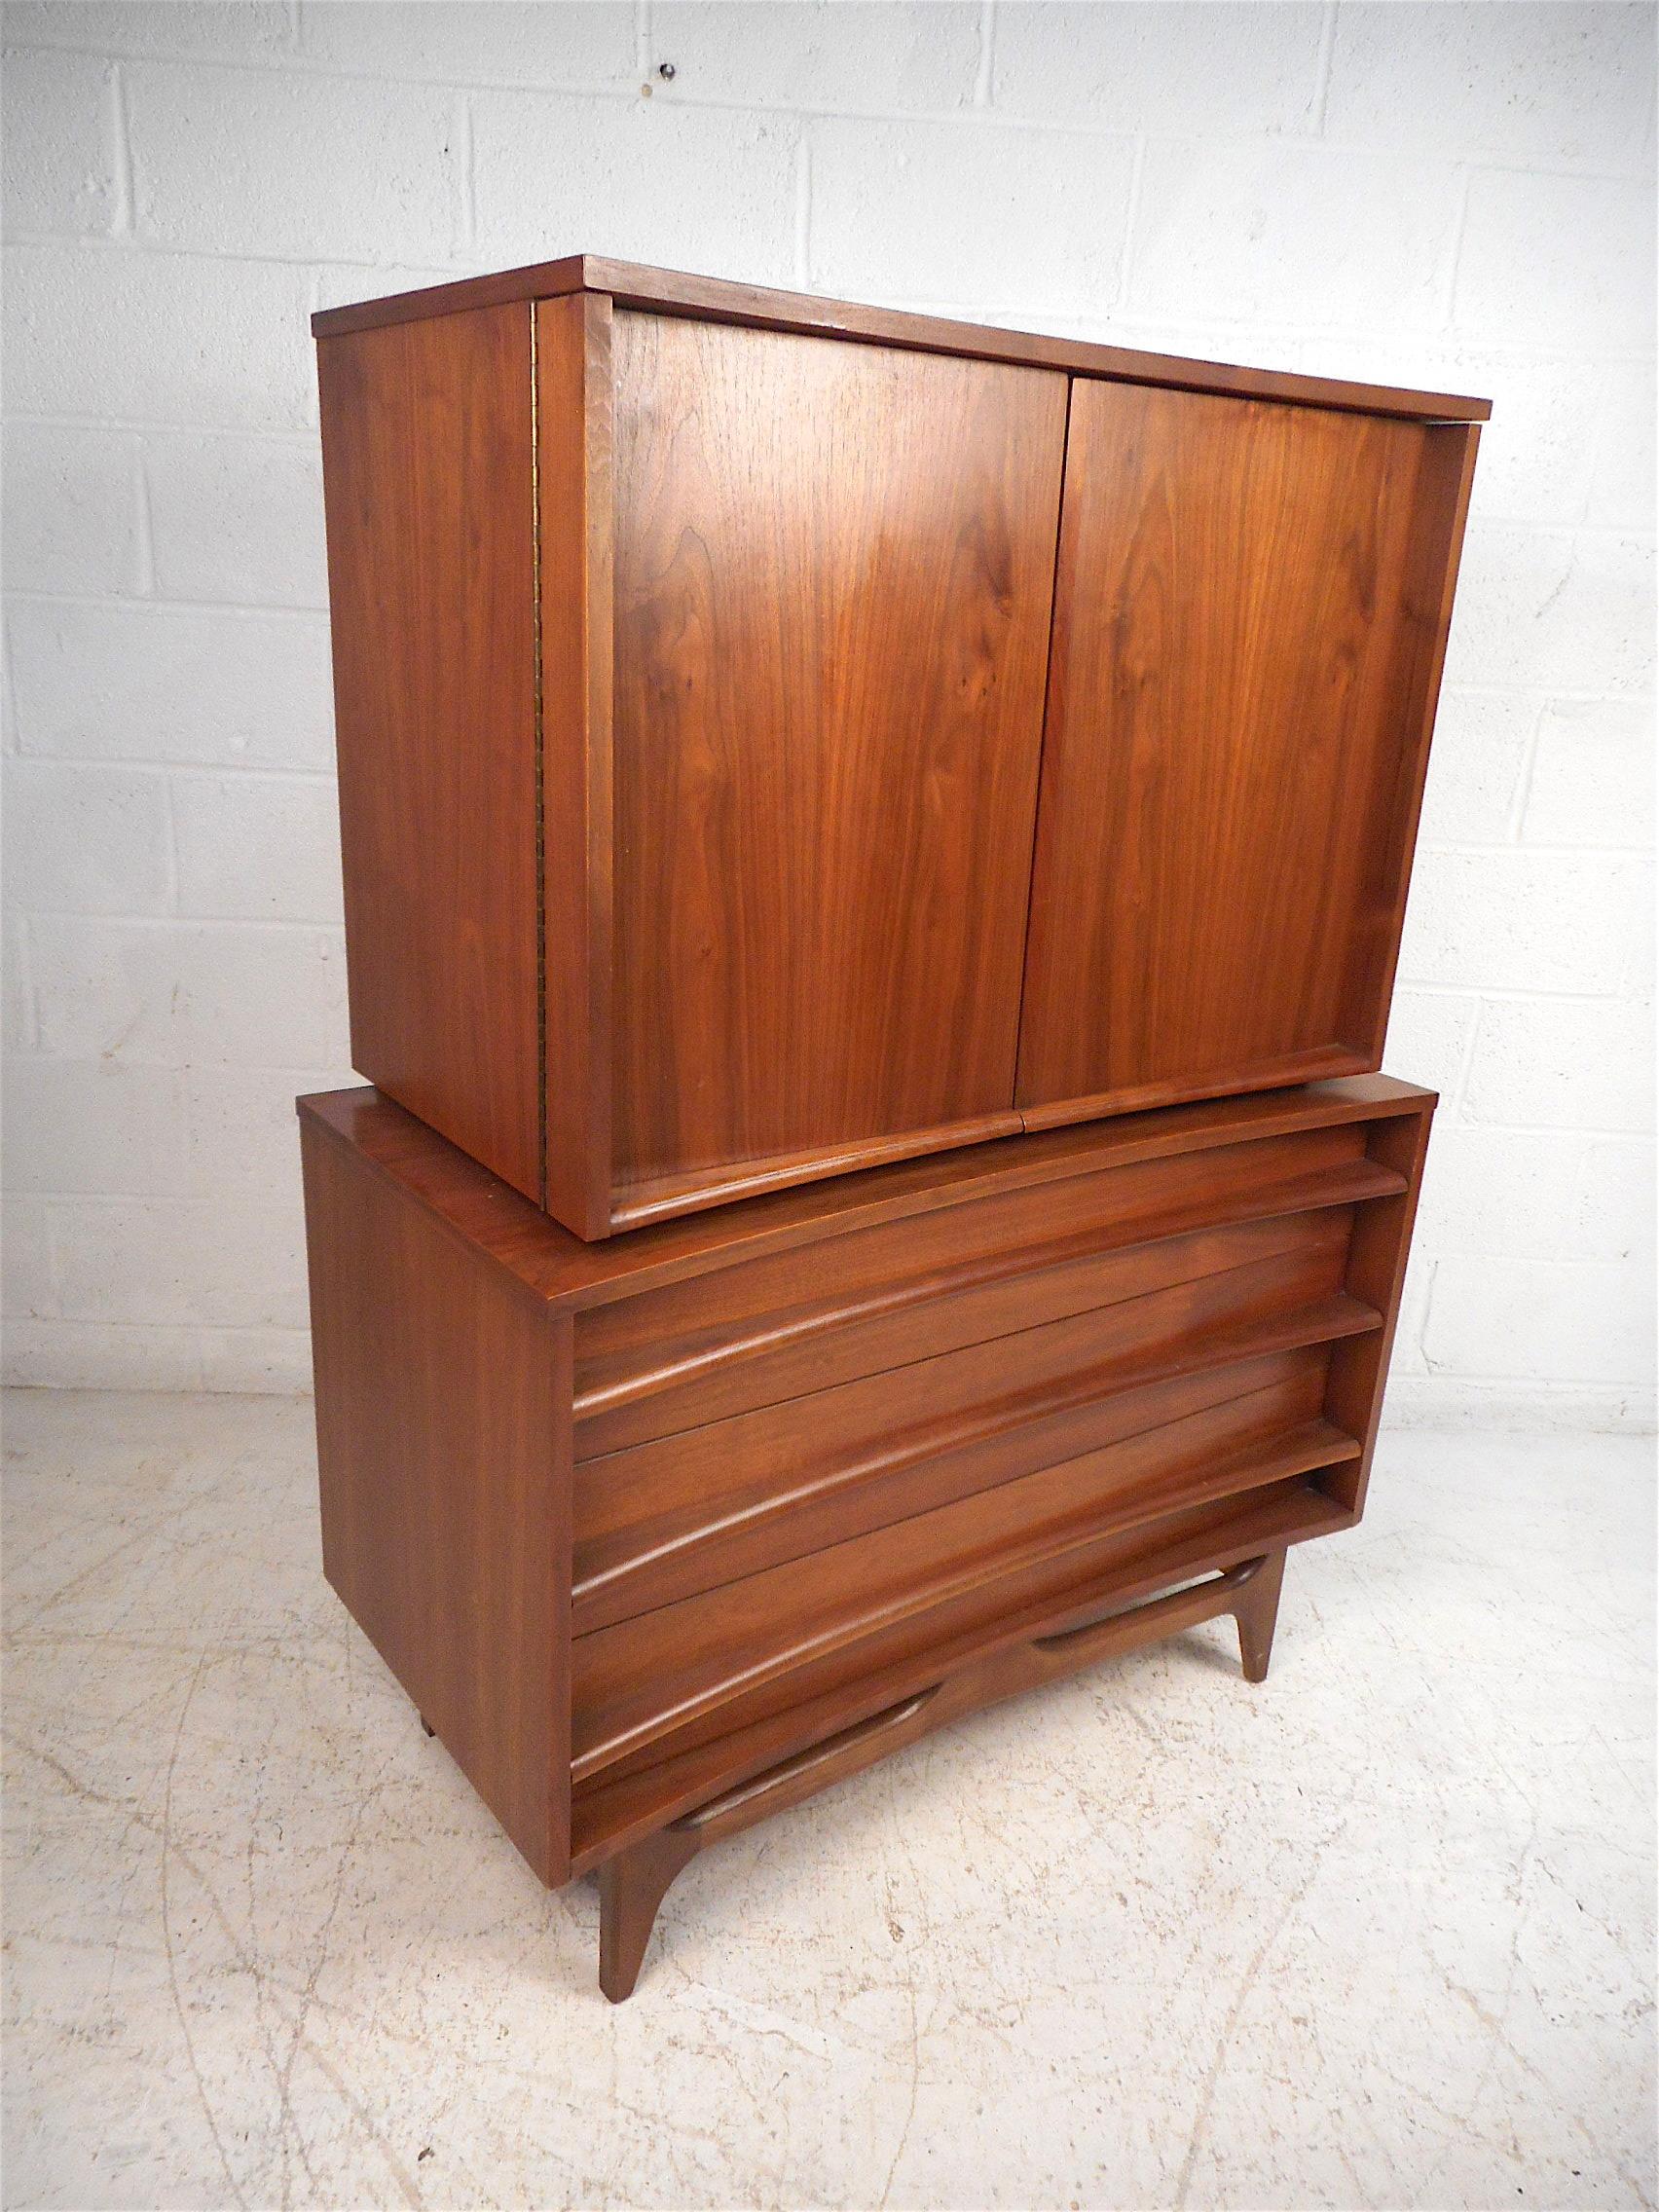 Stylish midcentury highboy dresser with a curved front. Handsome walnut veneer exterior, with a noteworthy book-matched grain pattern on the cabinet doors, which are mounted on sturdy piano hinges. Three spacious drawers on the piece's bottom